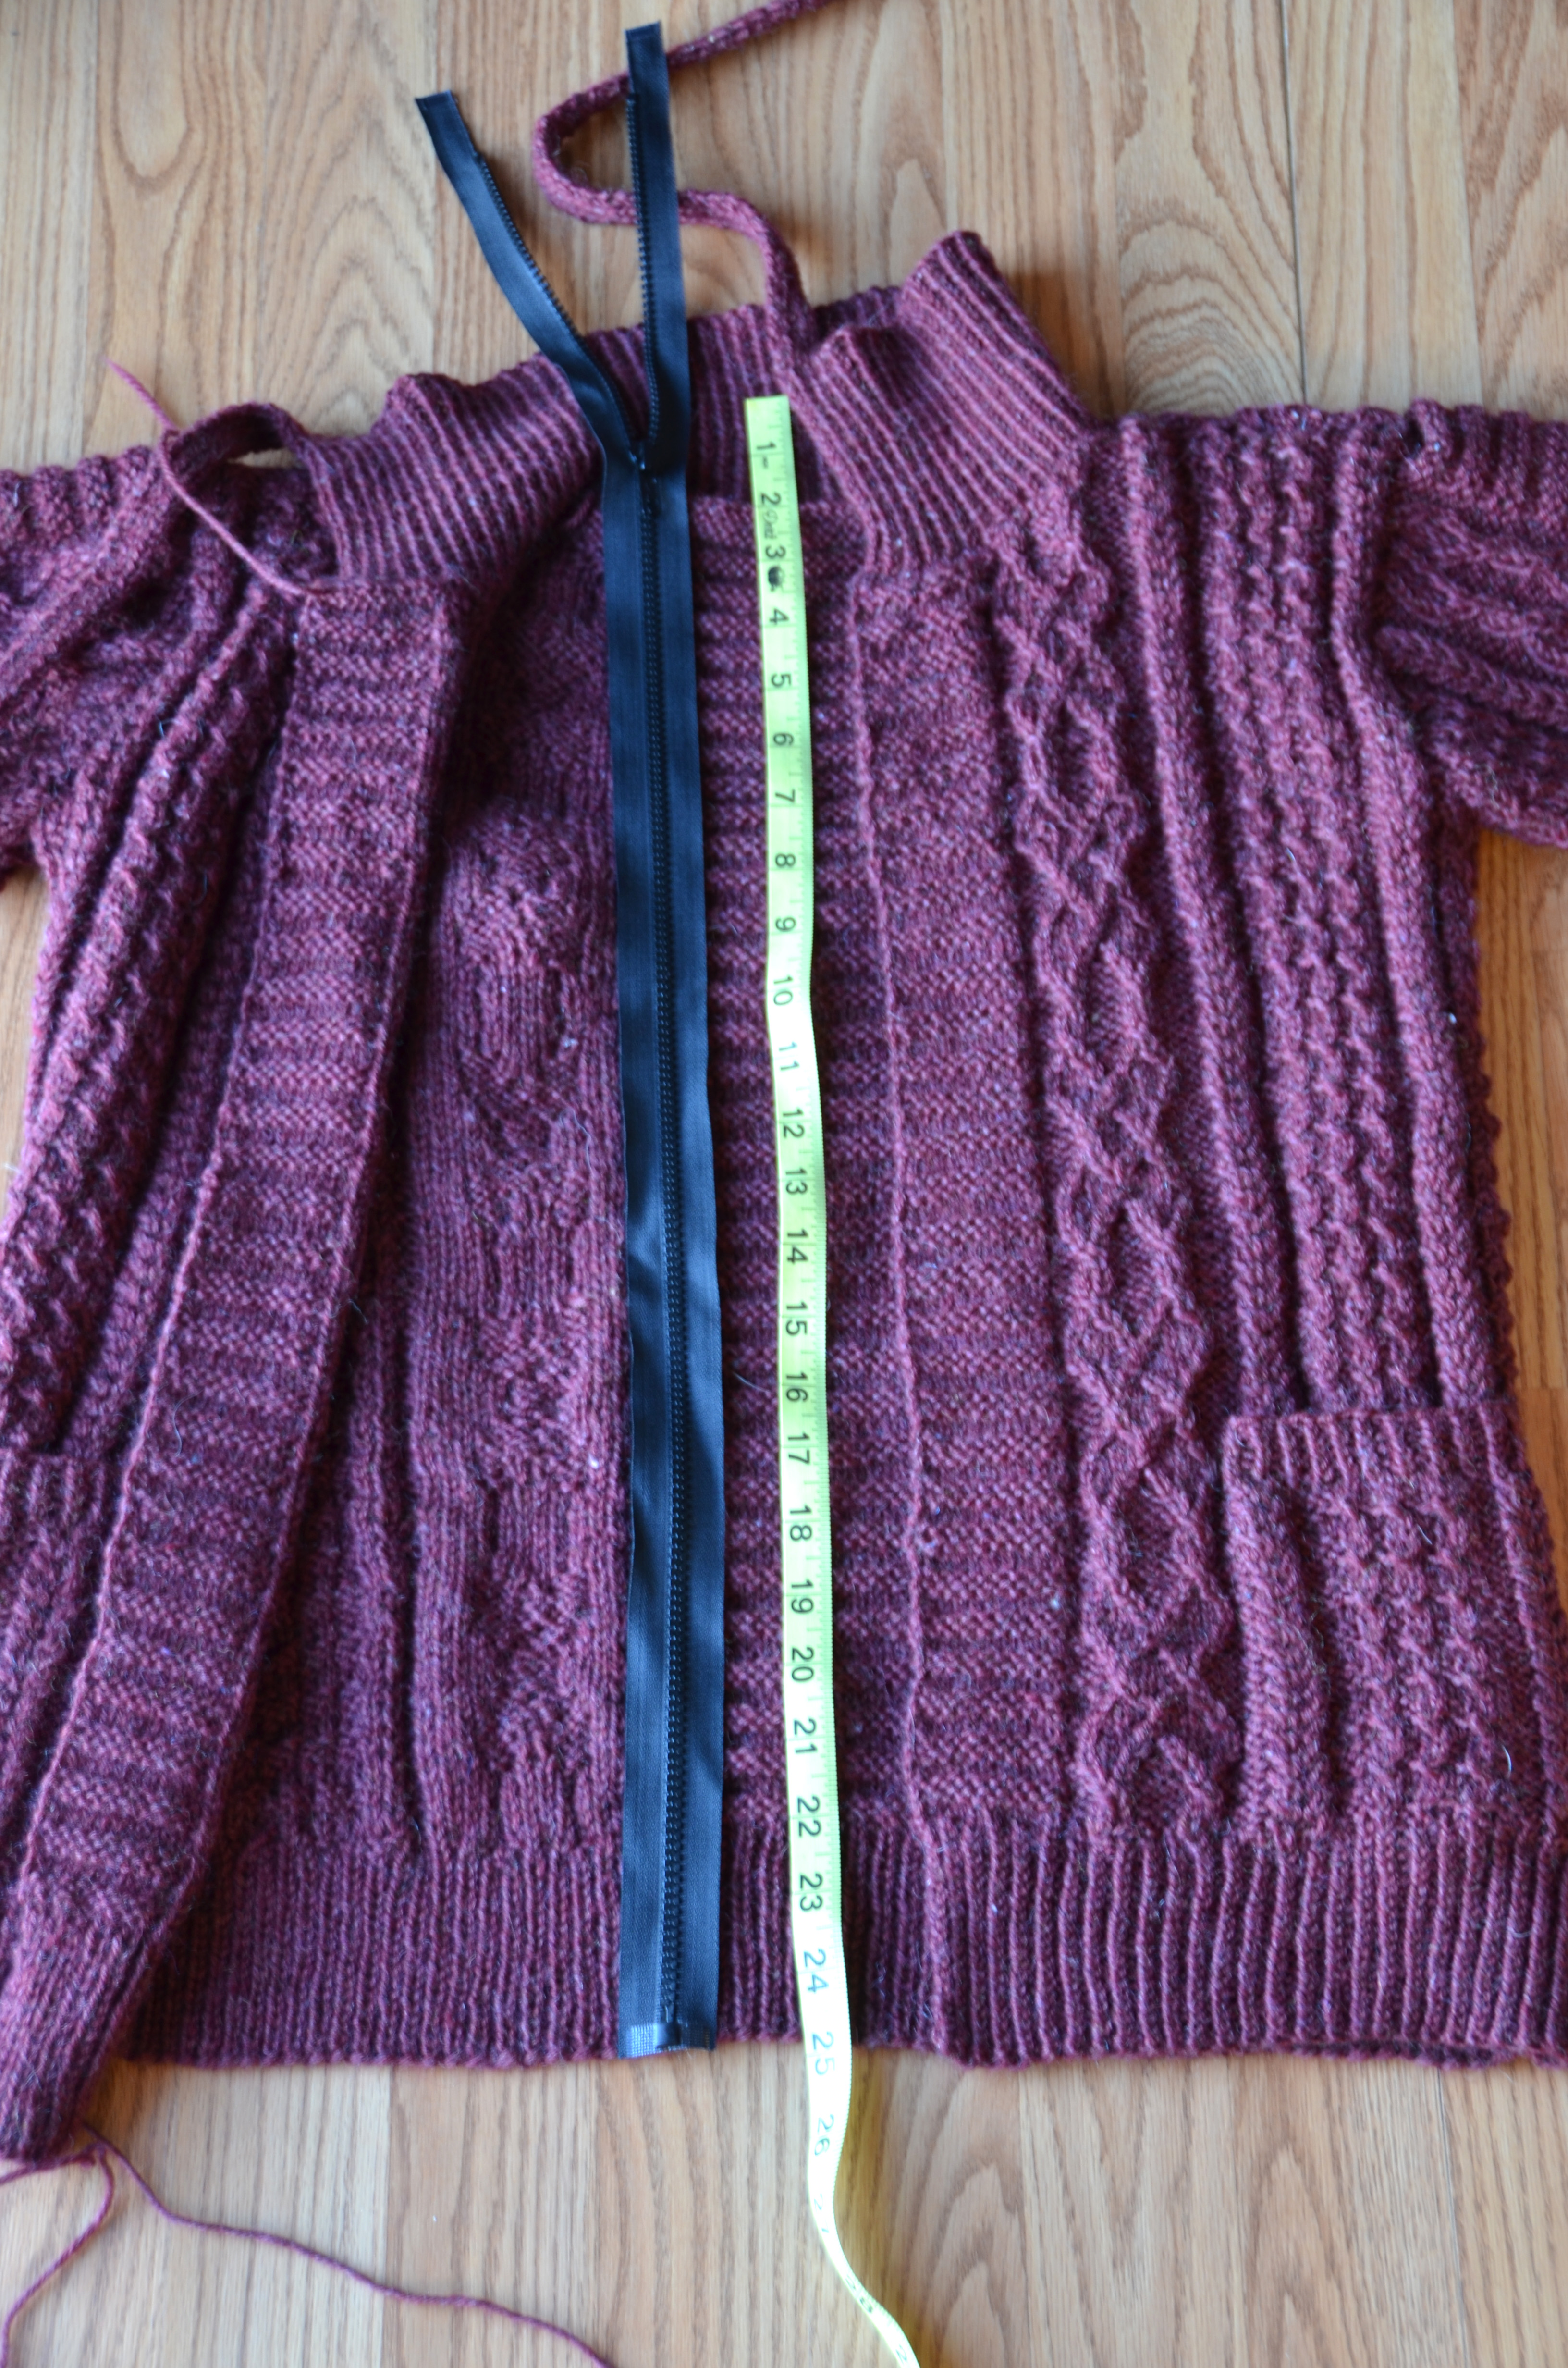 Be sure not to stretch the knitting when measuring for the zipper.